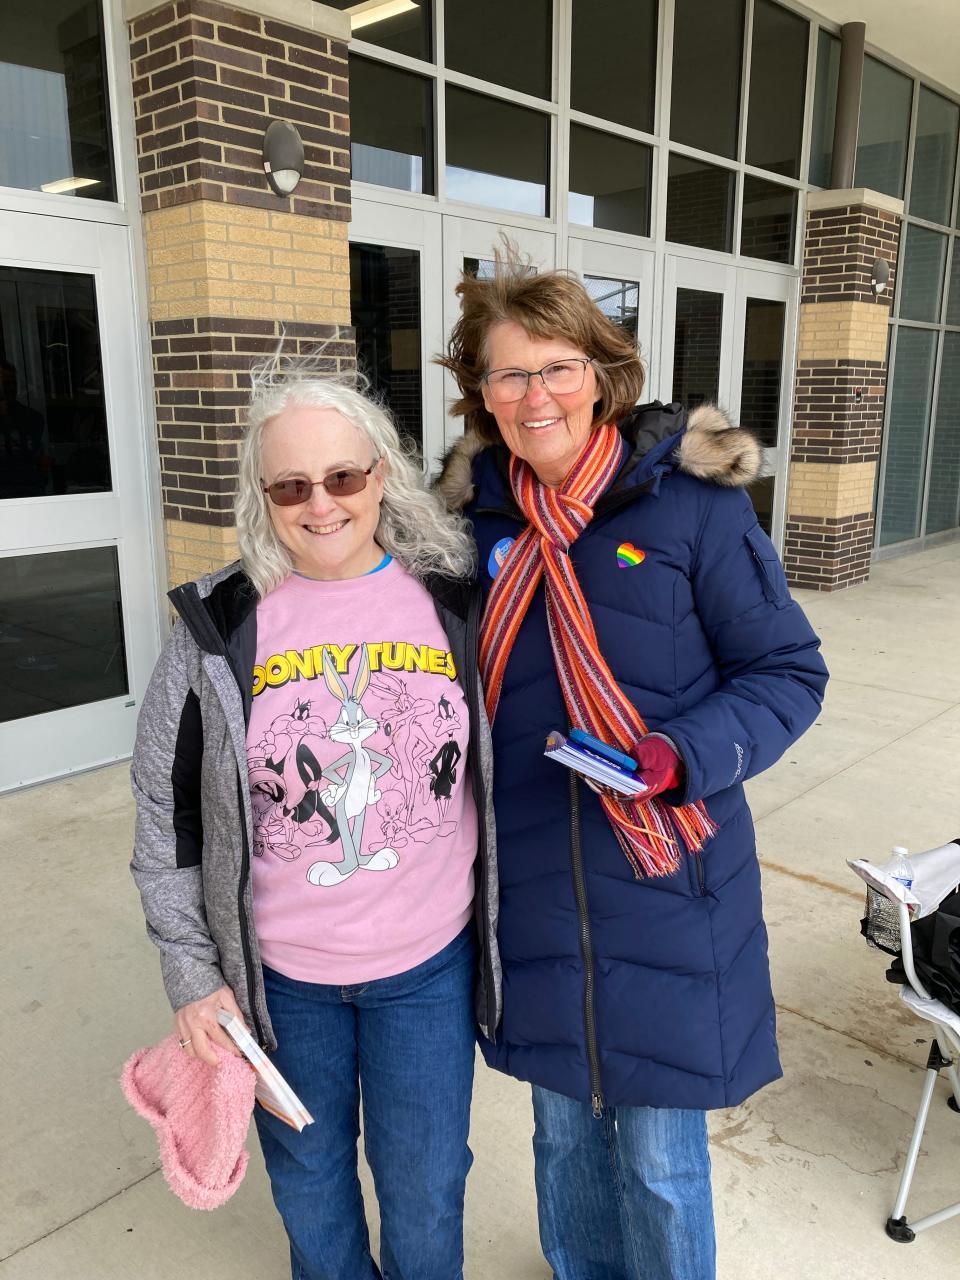 Julie Davis (left) and Elizabeth Lamping handed out candidate literature outside Beech Grove High School on Tuesday, May 2, 2023.